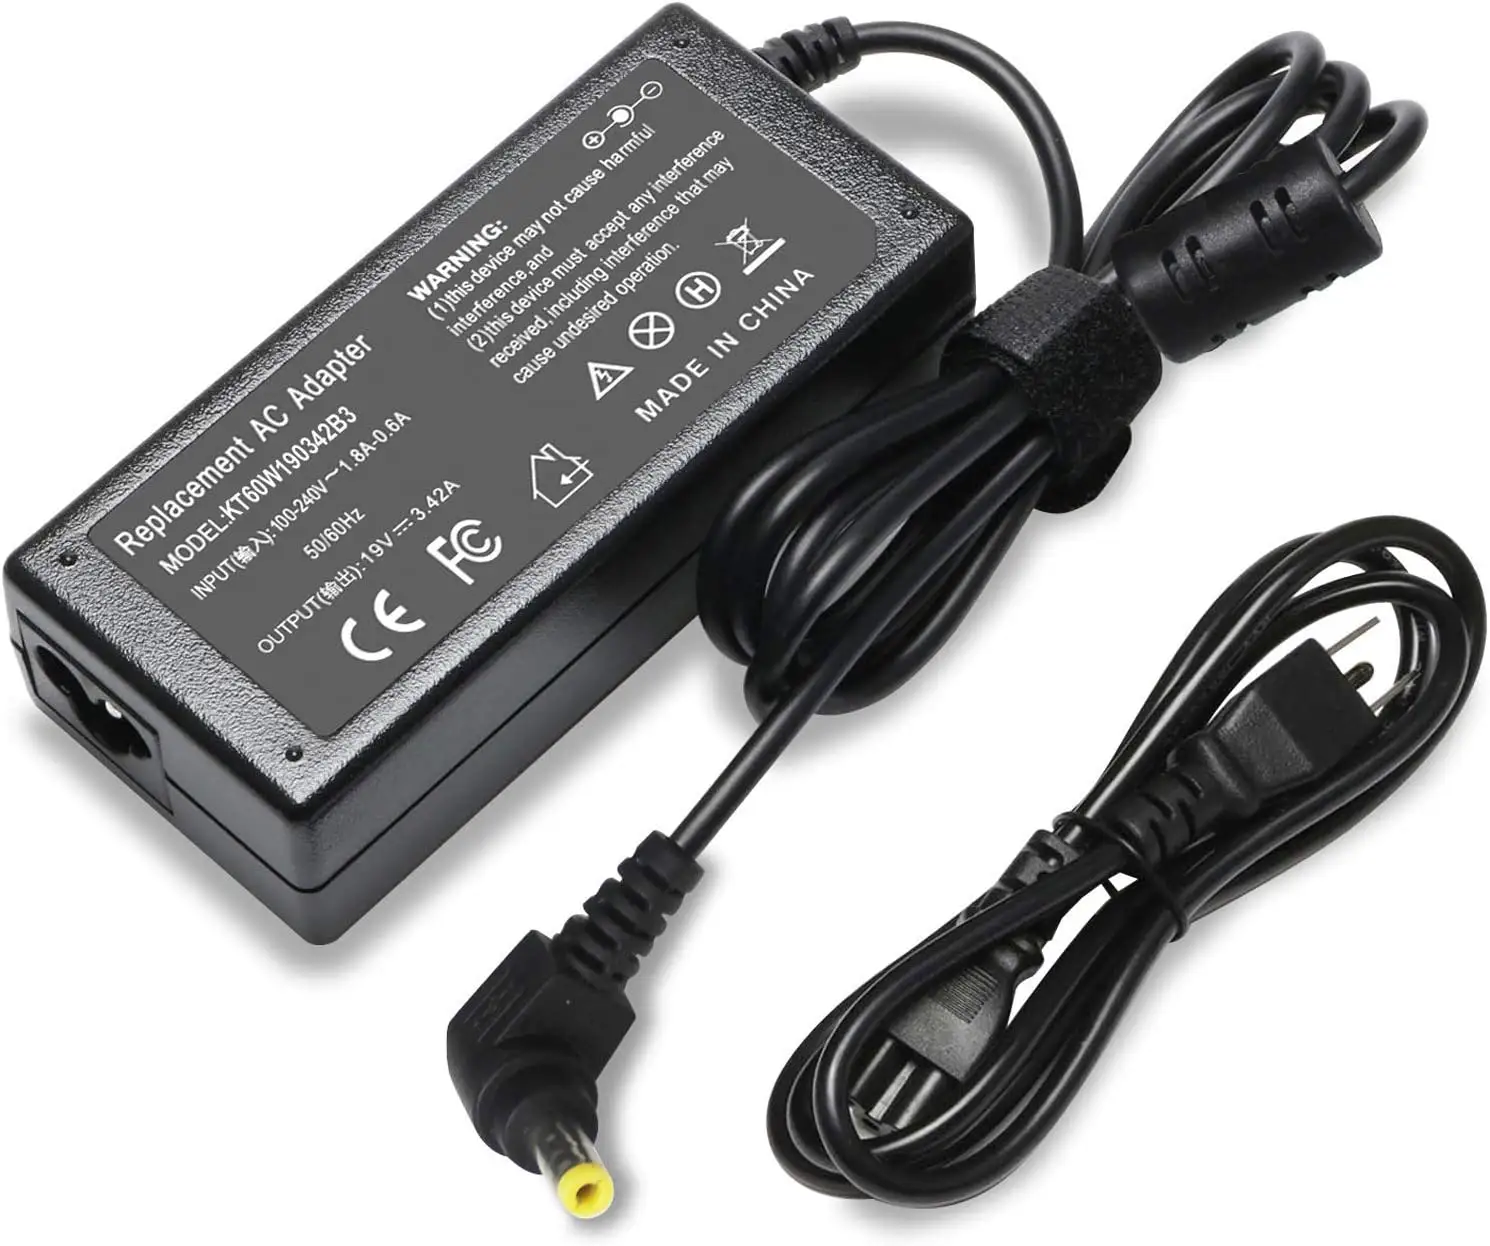 19V 3.42A 65W AC Adapter for Asus Laptop Computer Charger Notebook PC Power Cord Supply Source Plug Connector Size 5.5 x 2.5mm